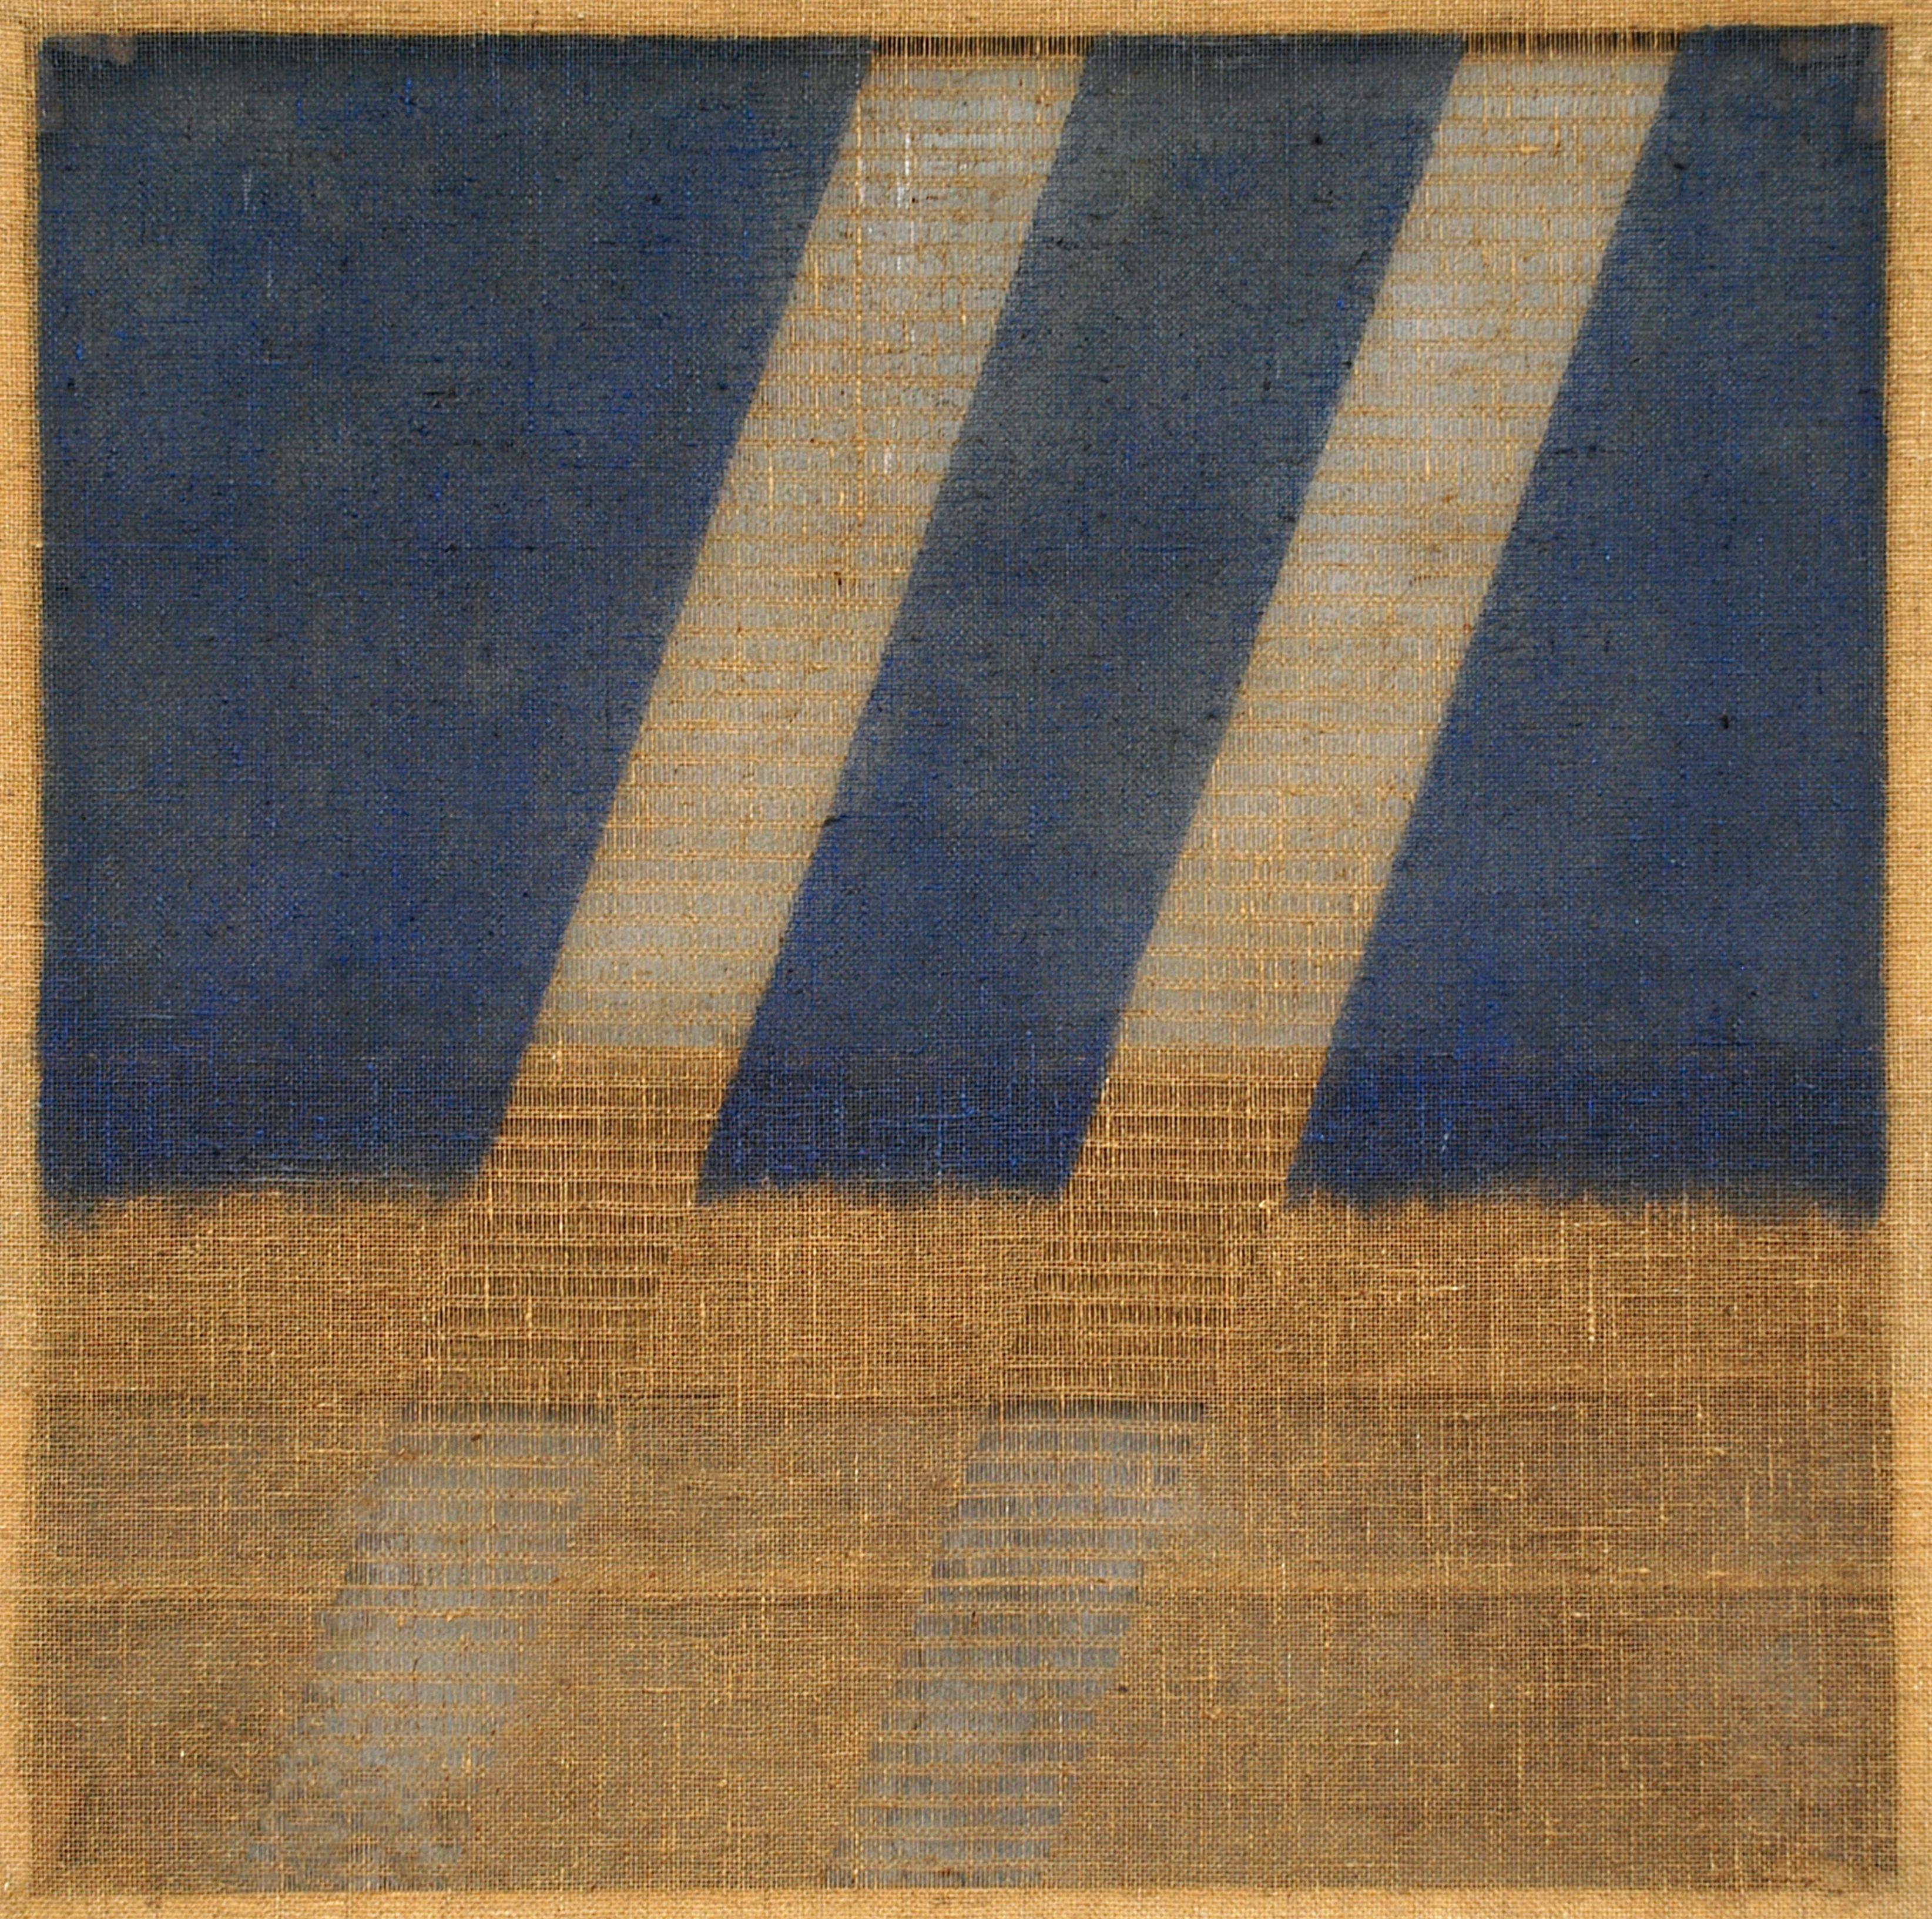 Pair of Untitled Paintings - Colored Jute by Salvatore Emblema - 1978/79 3